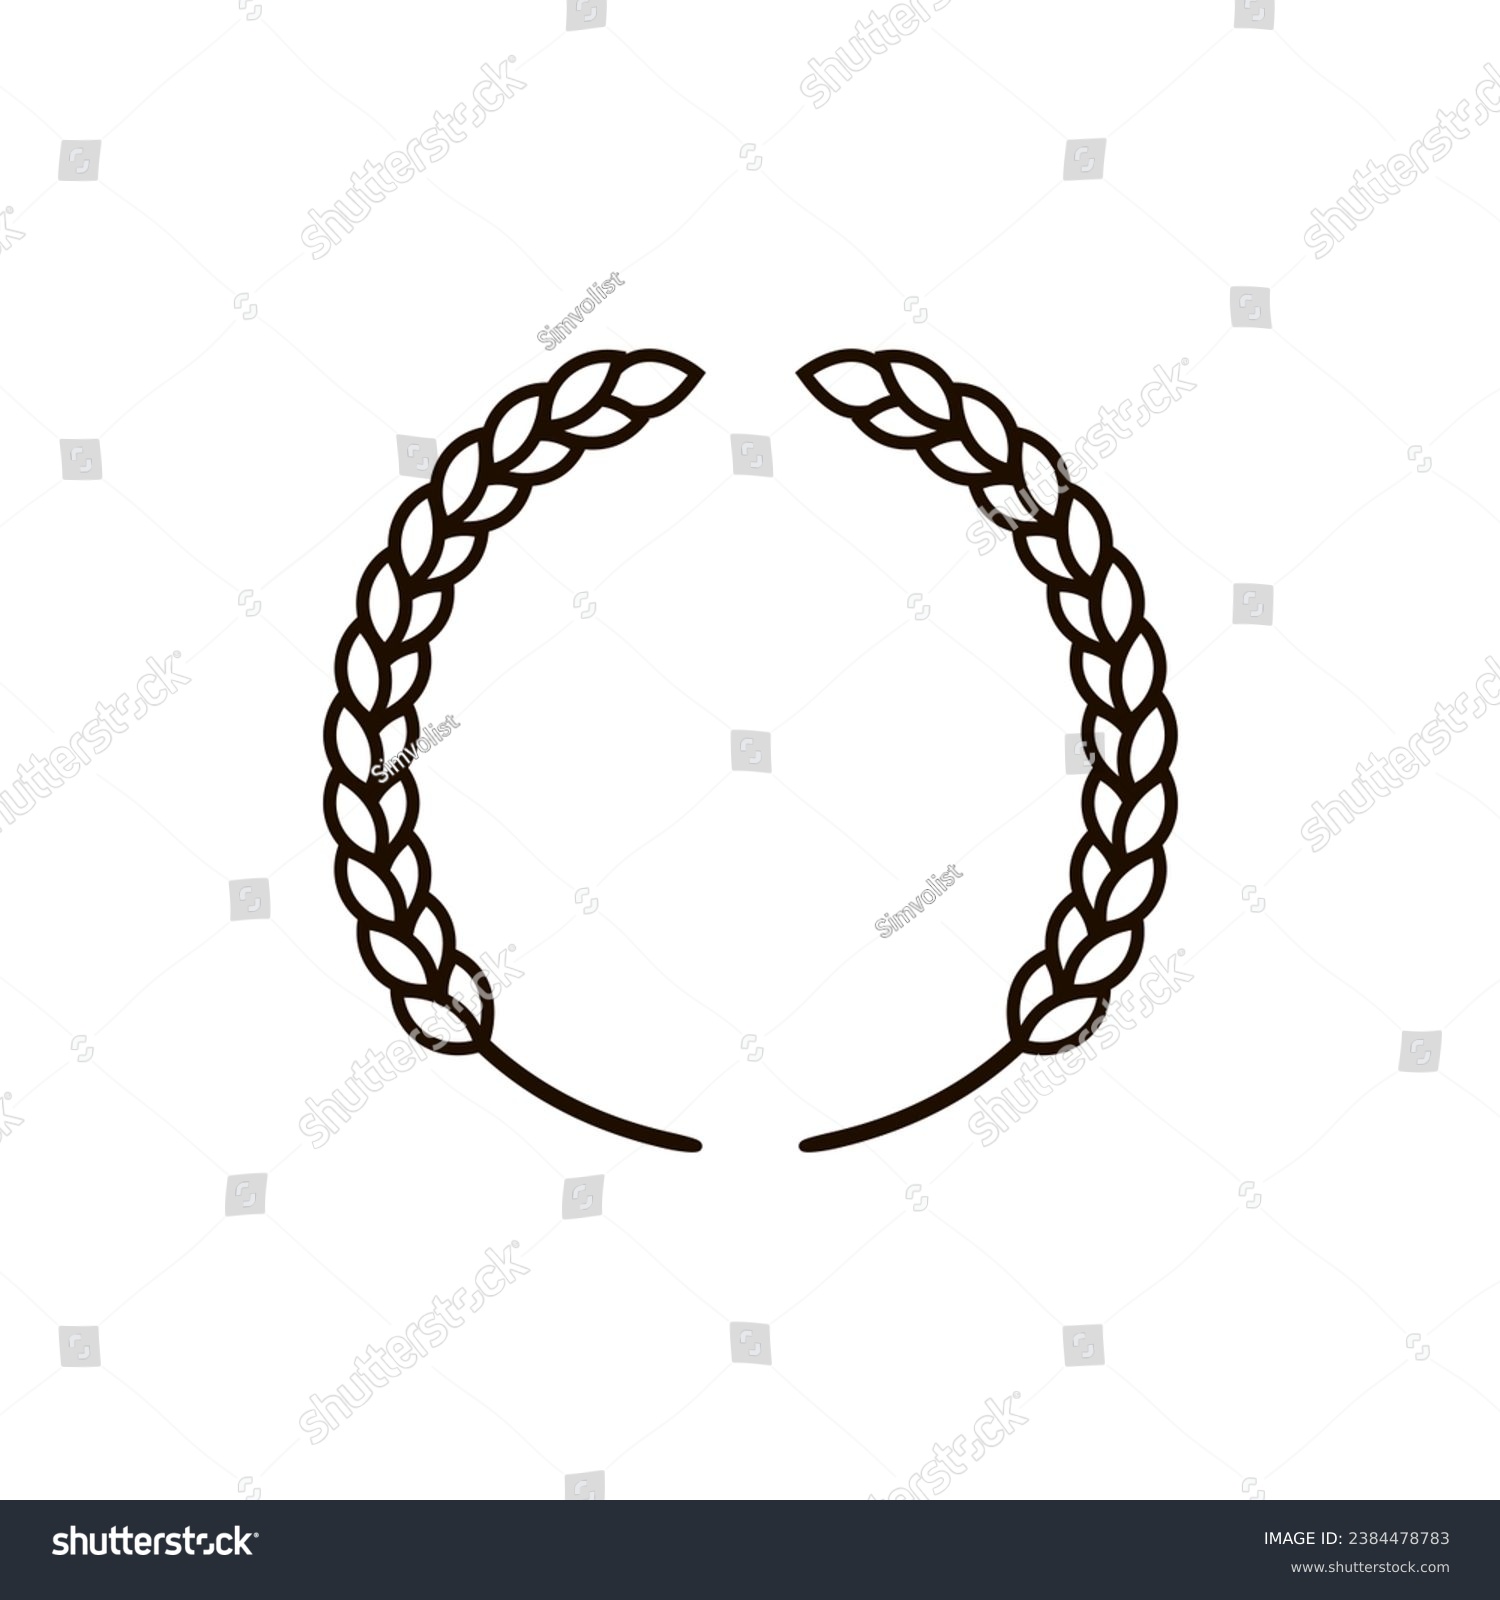 SVG of Wreath of wheat ears. Round frame of two wheat plants. svg